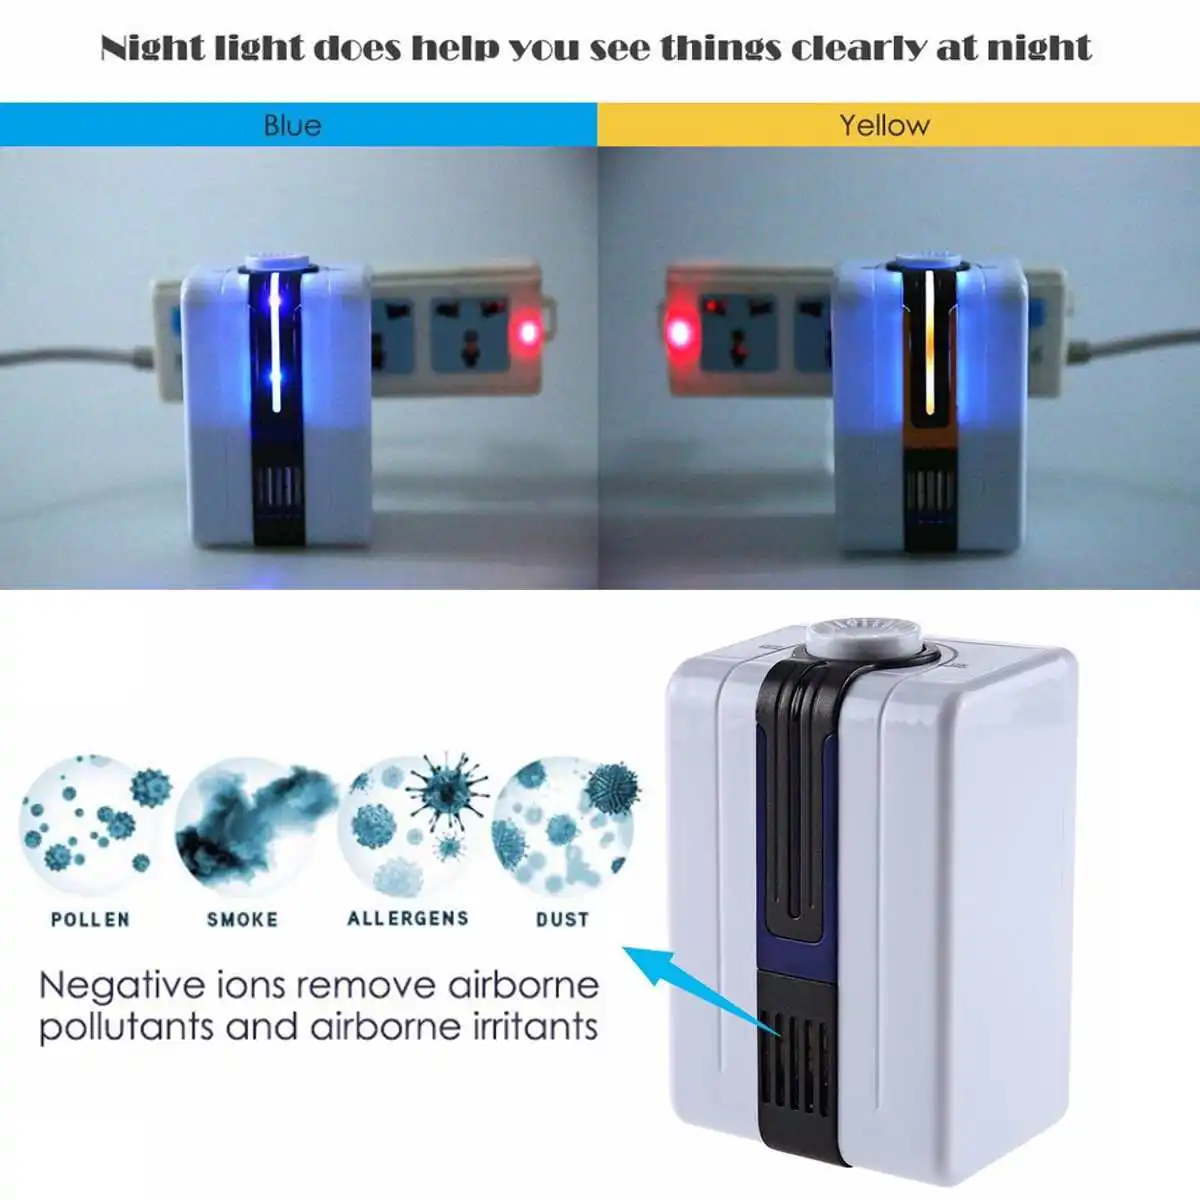 

110V/220V Air Purifier Home Ionizer Purifiers Ozonator Air Cleaner Oxygen Purify Kill Bacteria Viruse Clear Peculiar Smell Smoke